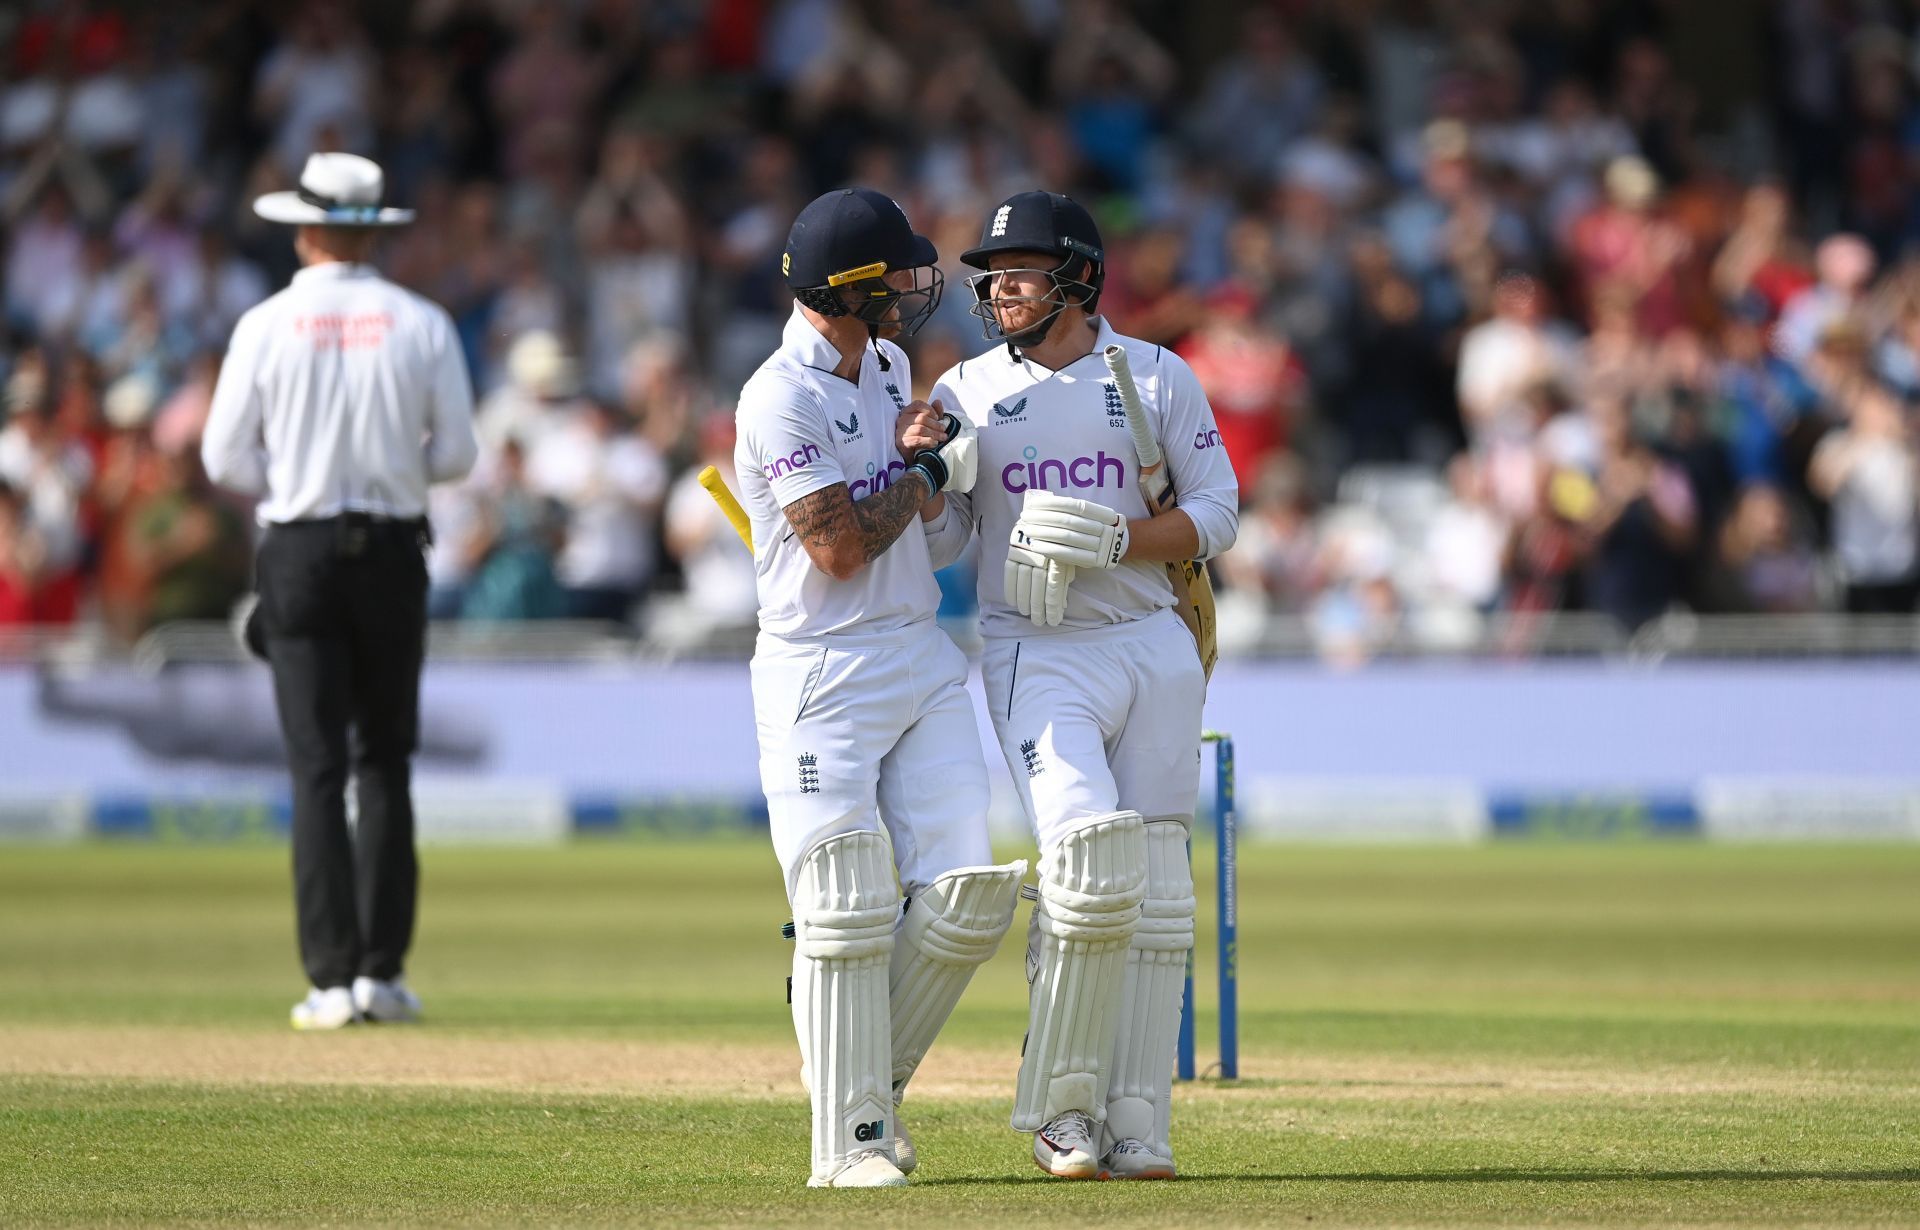 Ben Stokes (left) and Jonny Bairstow. Pic: Getty Images